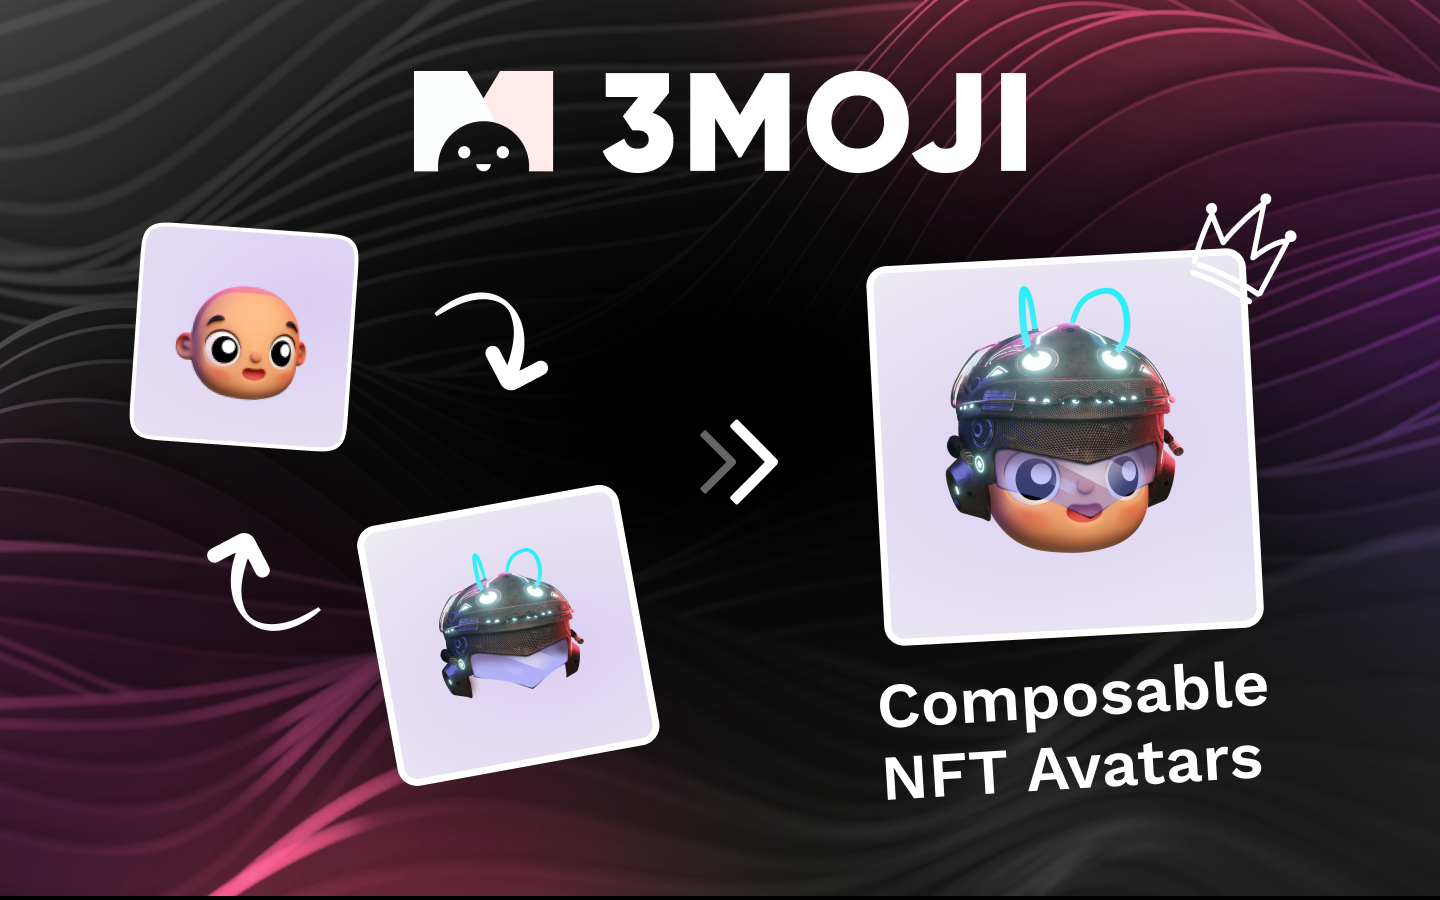 3moji Allows You to Upgrade Your NFT